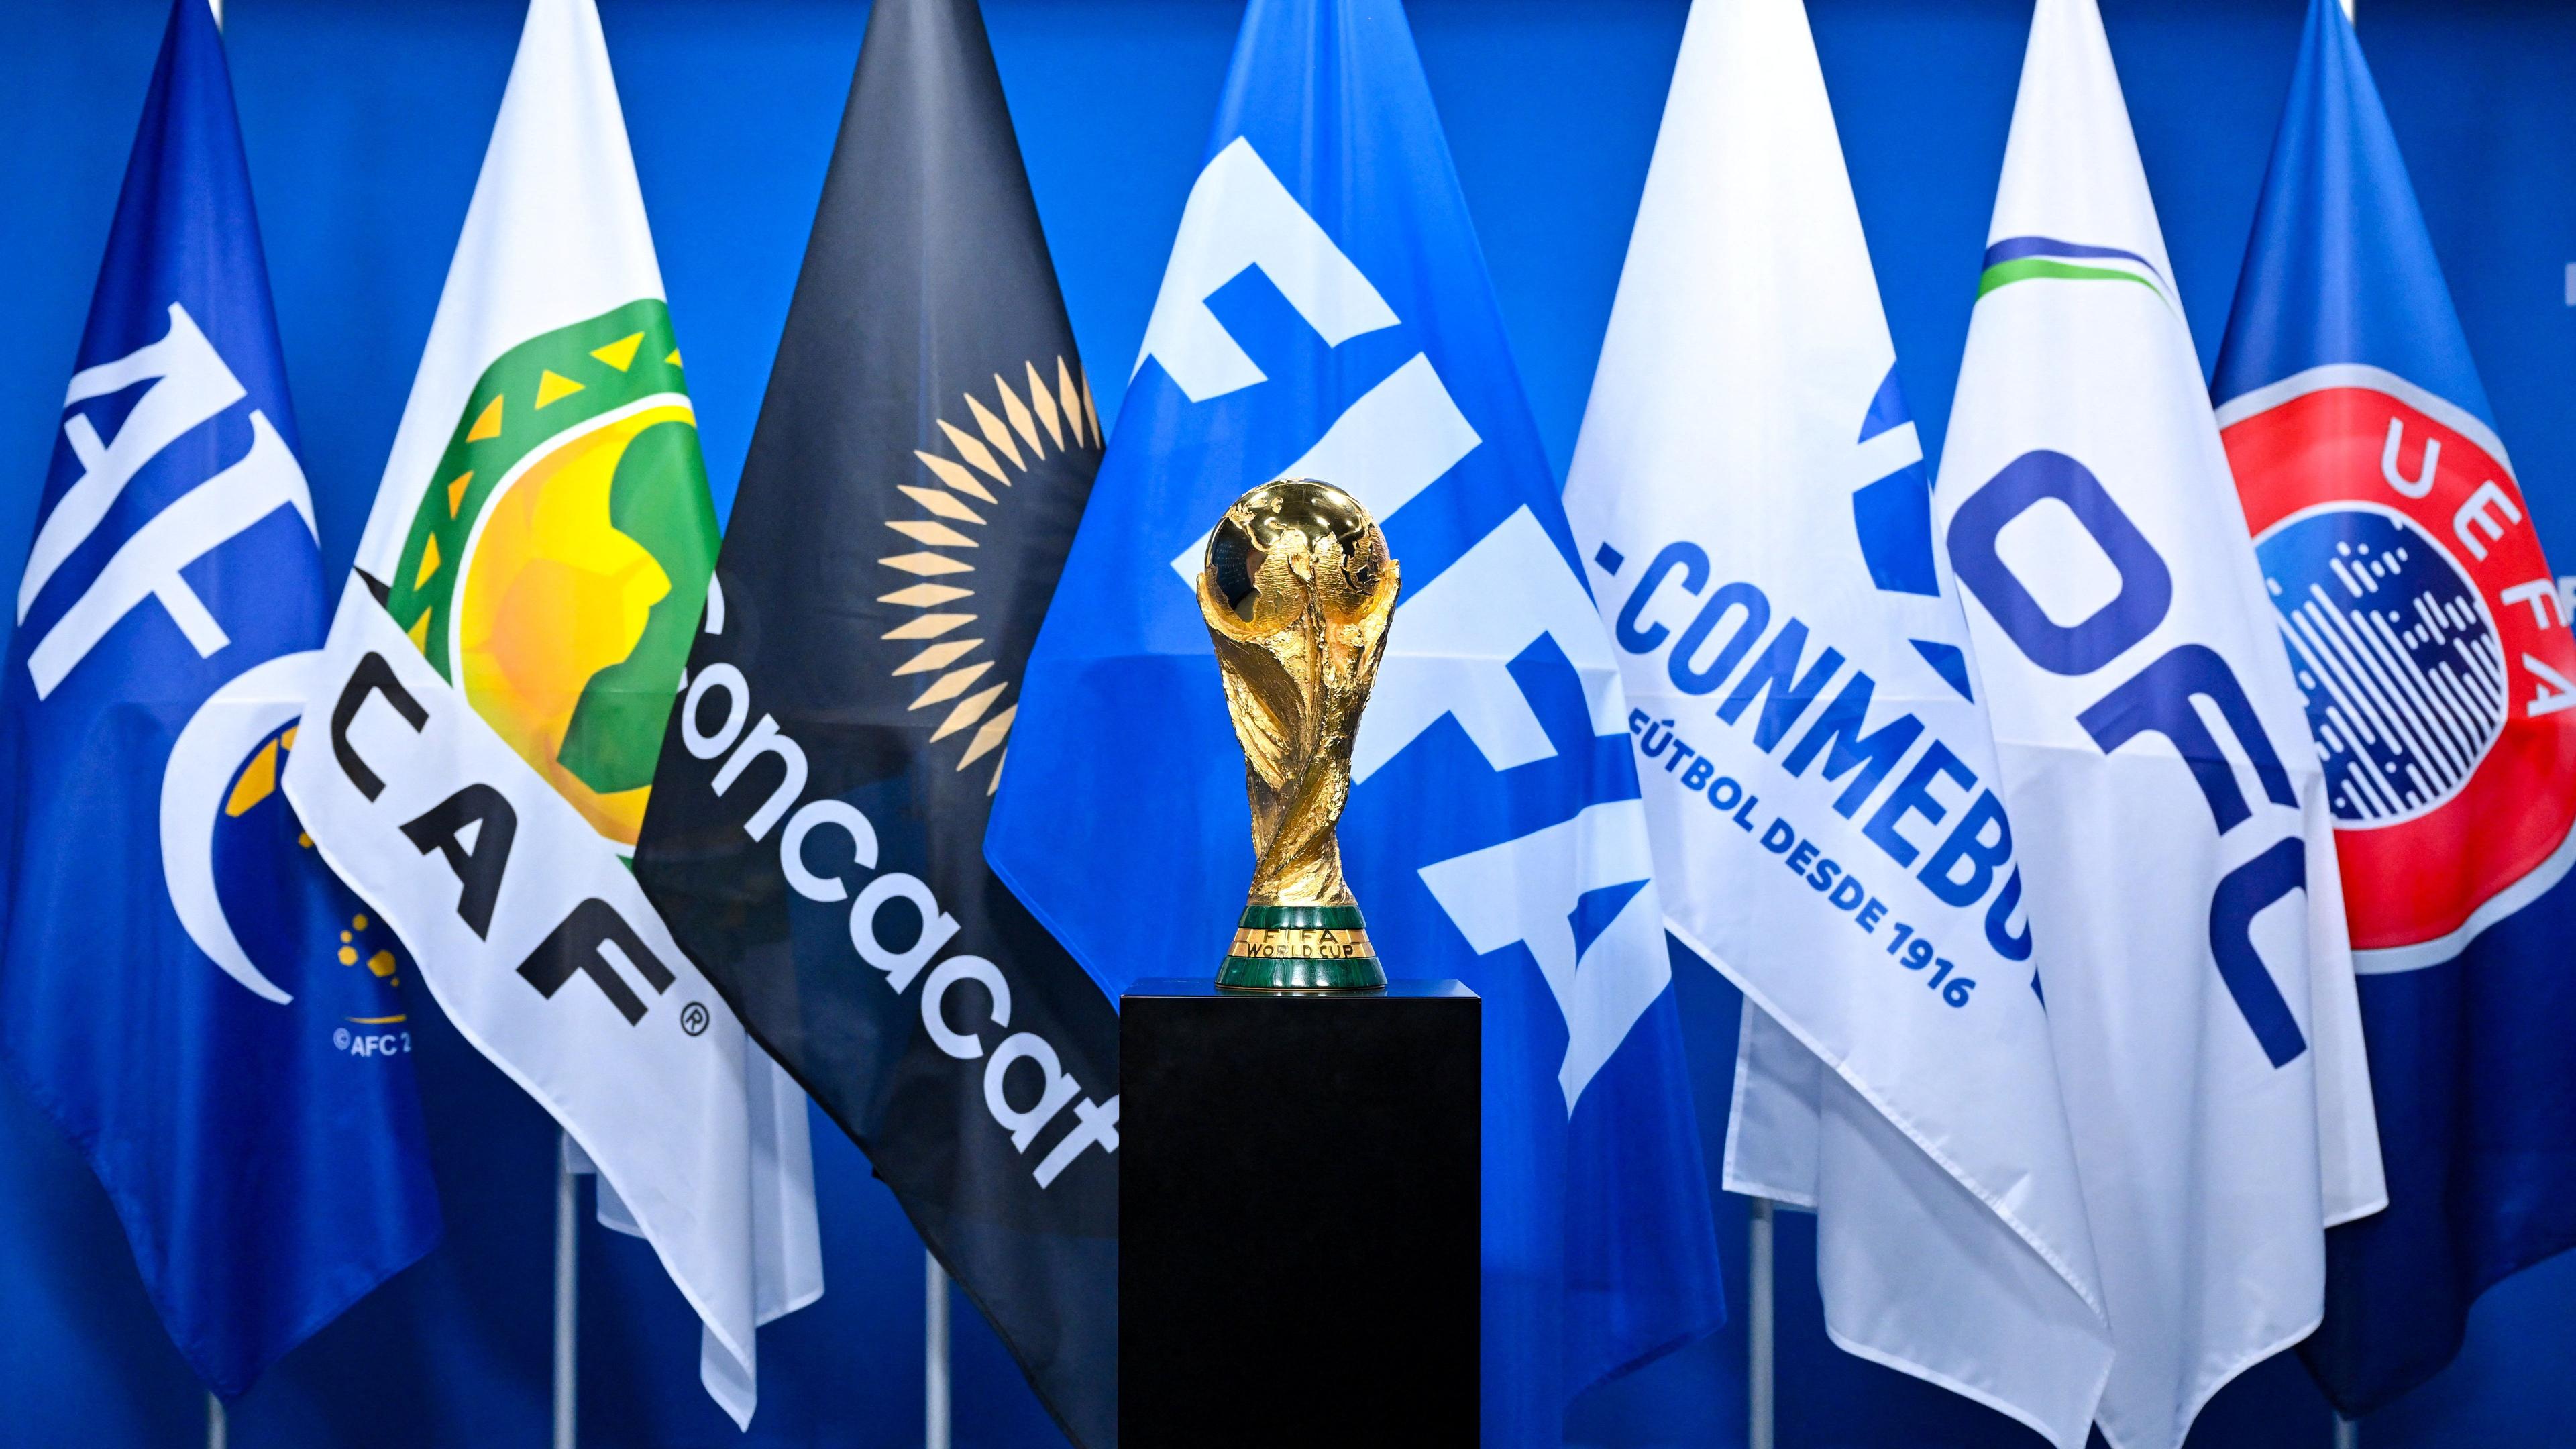 For the first time, the 2030 World Cup will take place in six countries on three continents